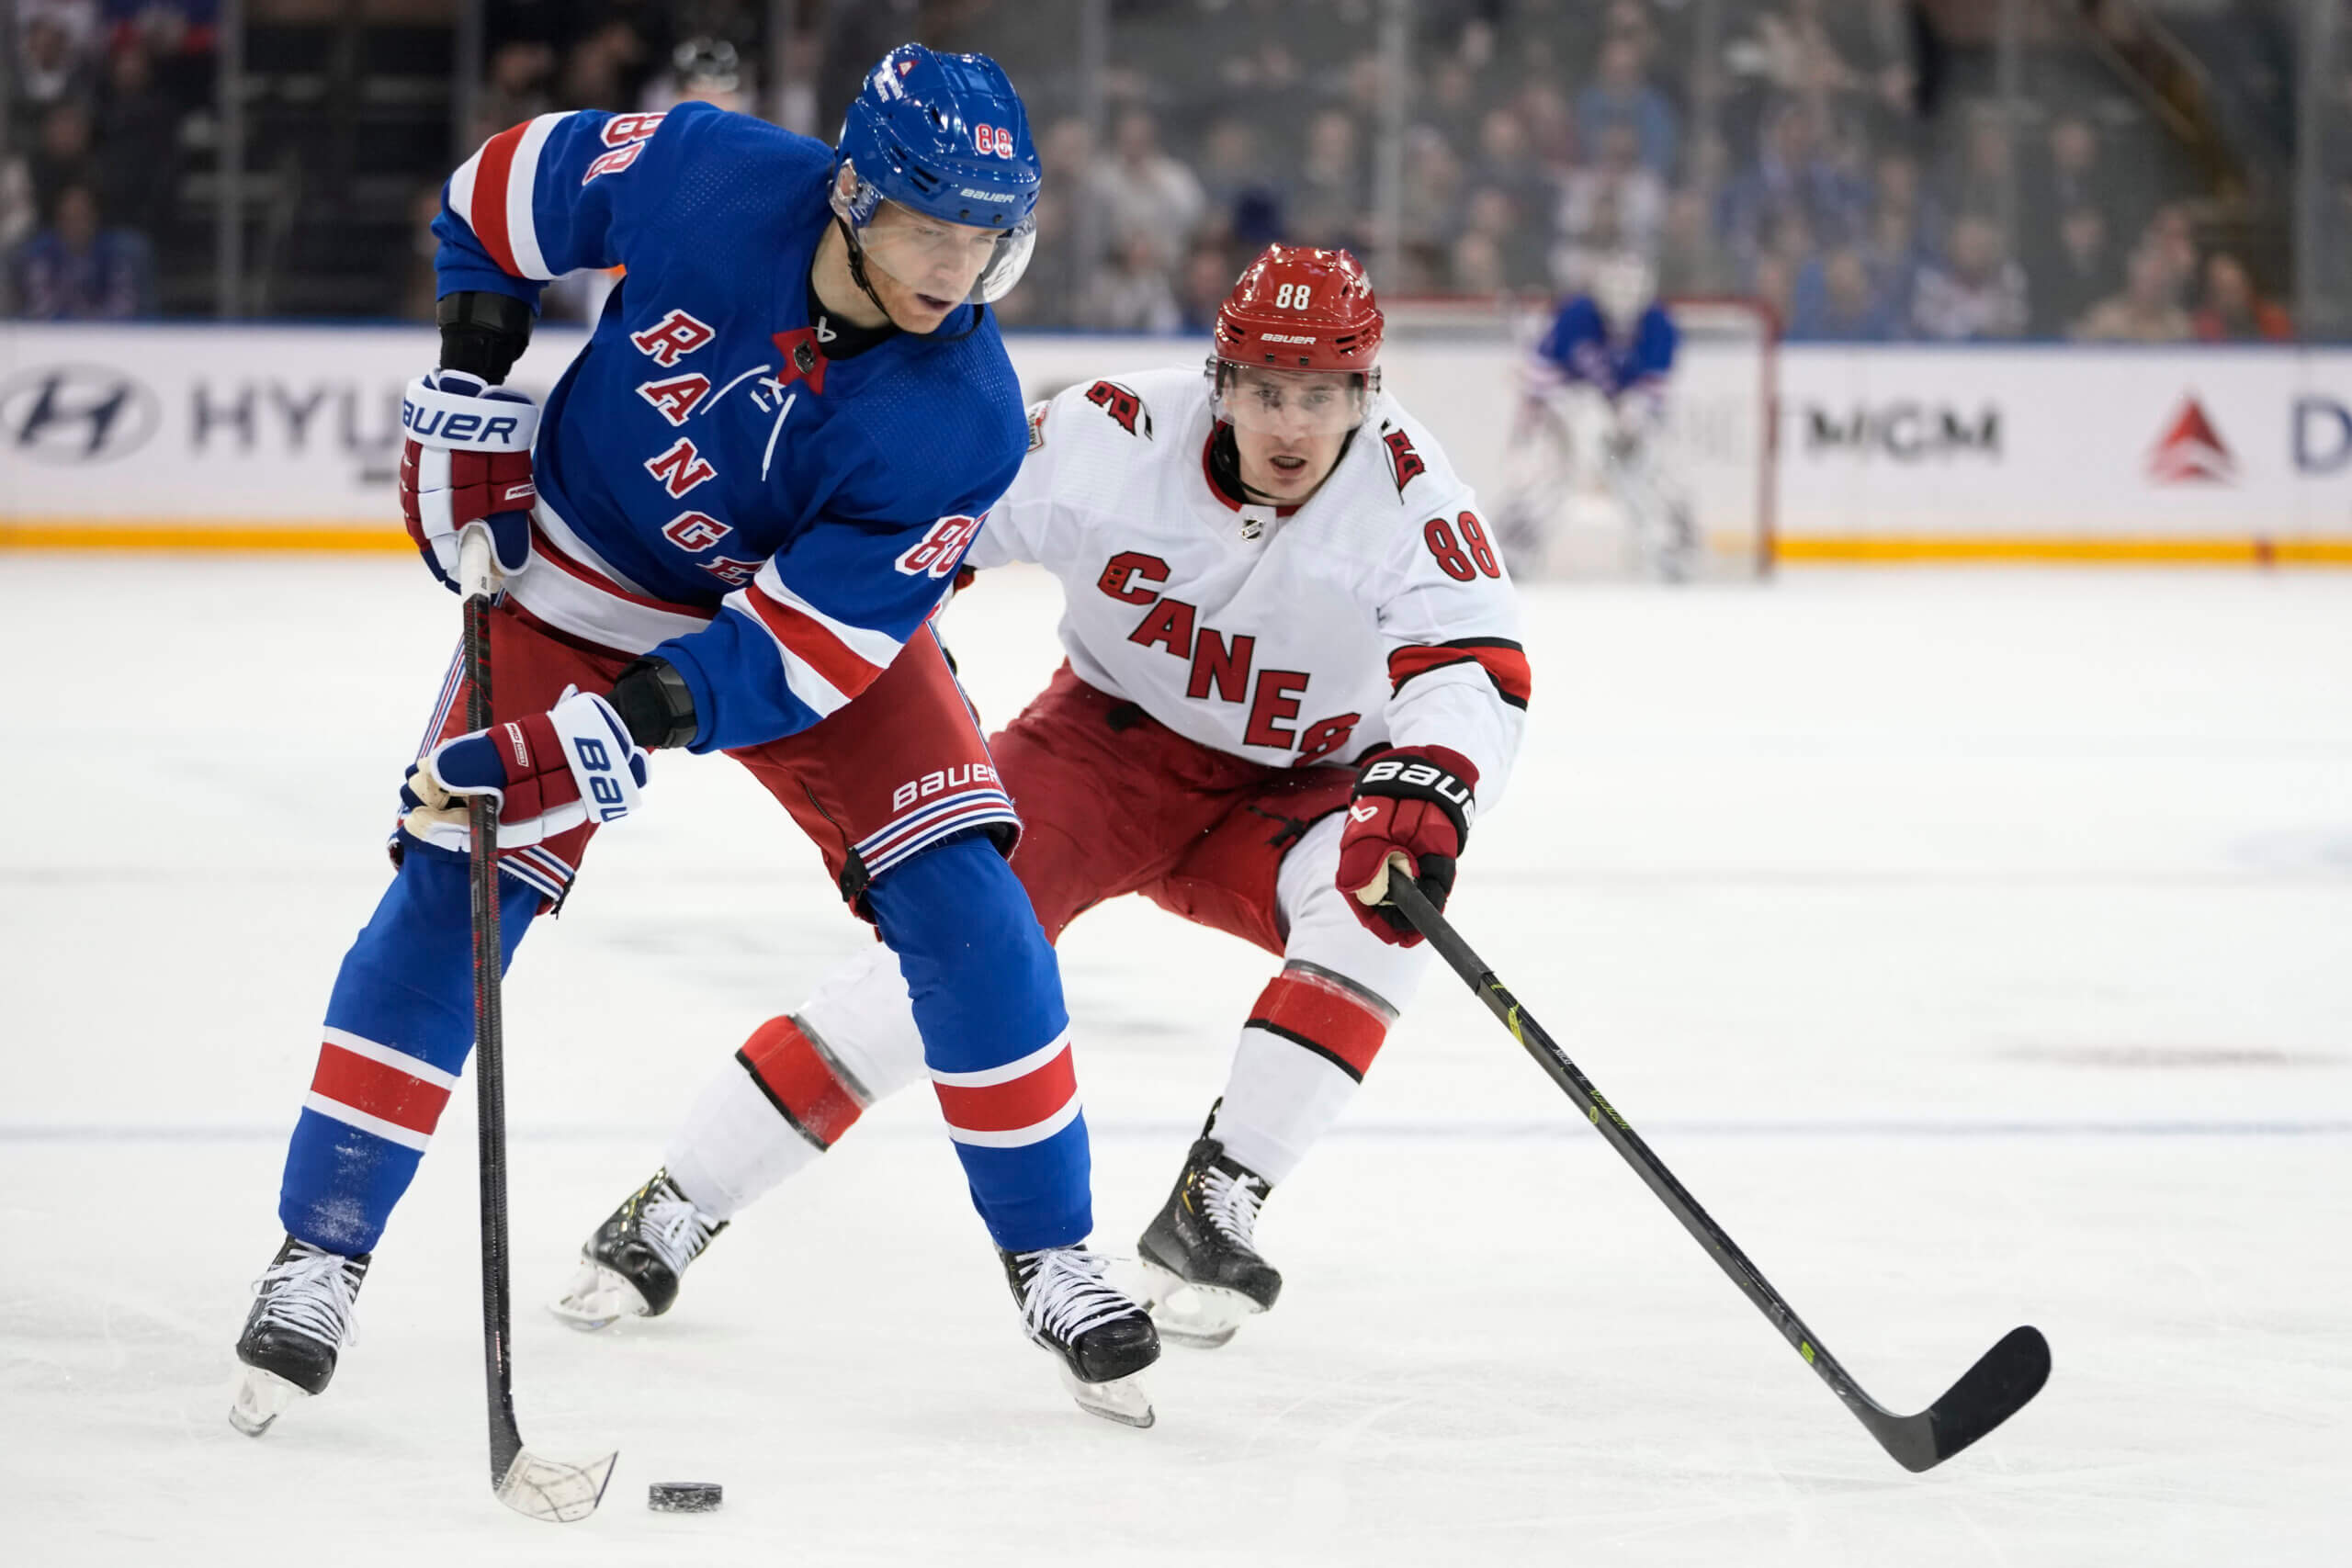 PREVIEW: Bruins go back-to-back, head to NYC to face the Rangers